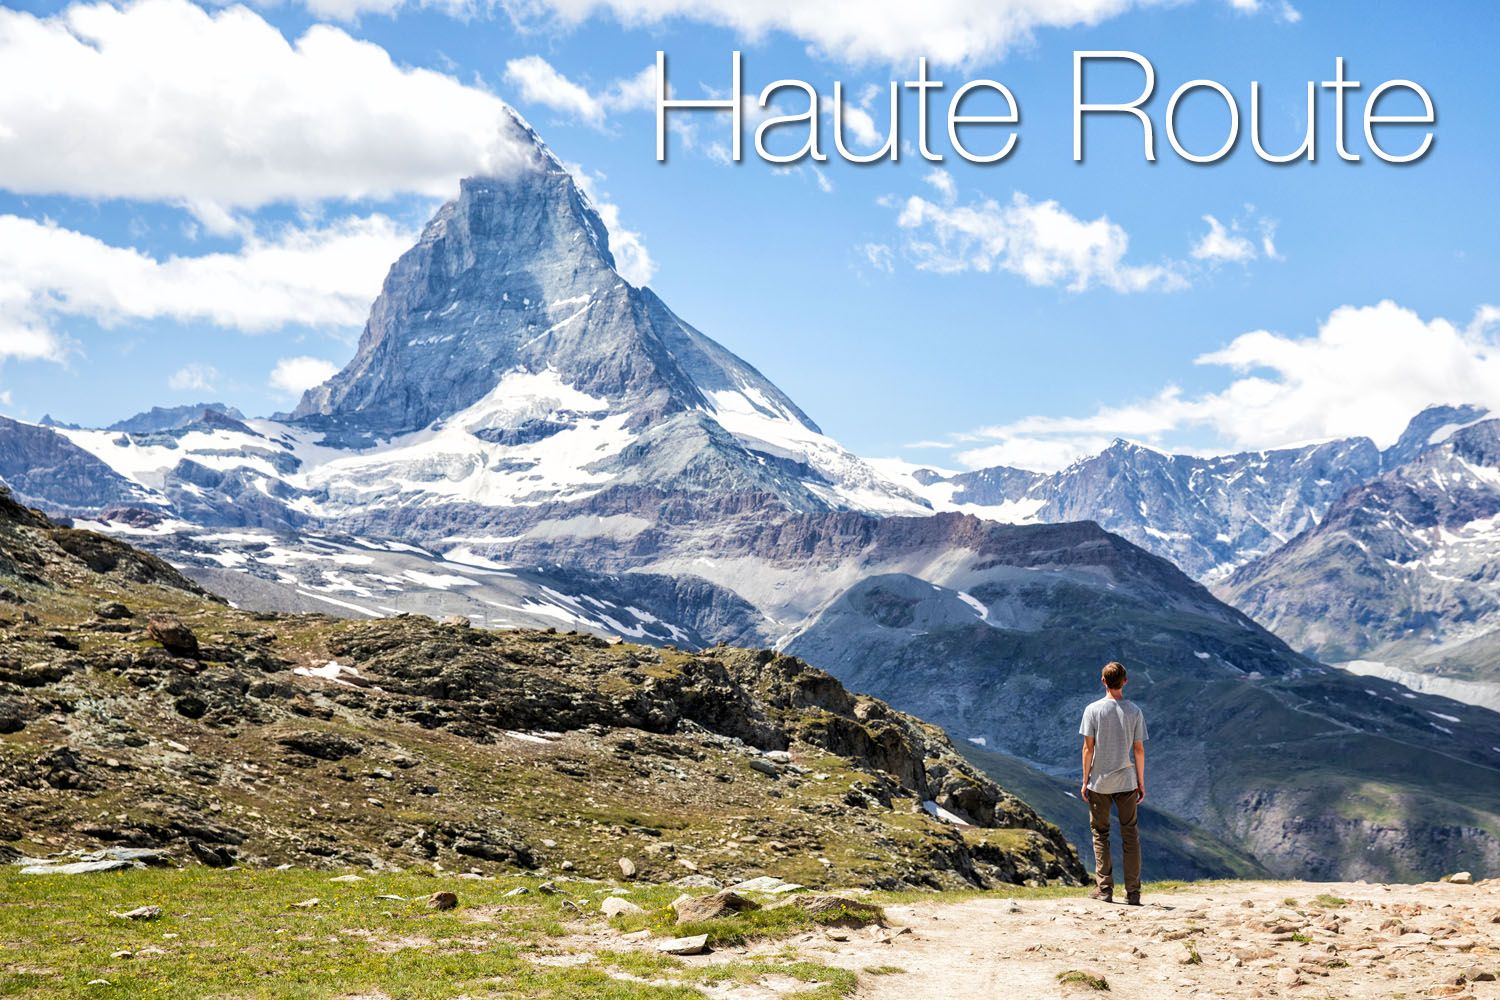 A man staring at a mountain while trekking on the Haute Route.